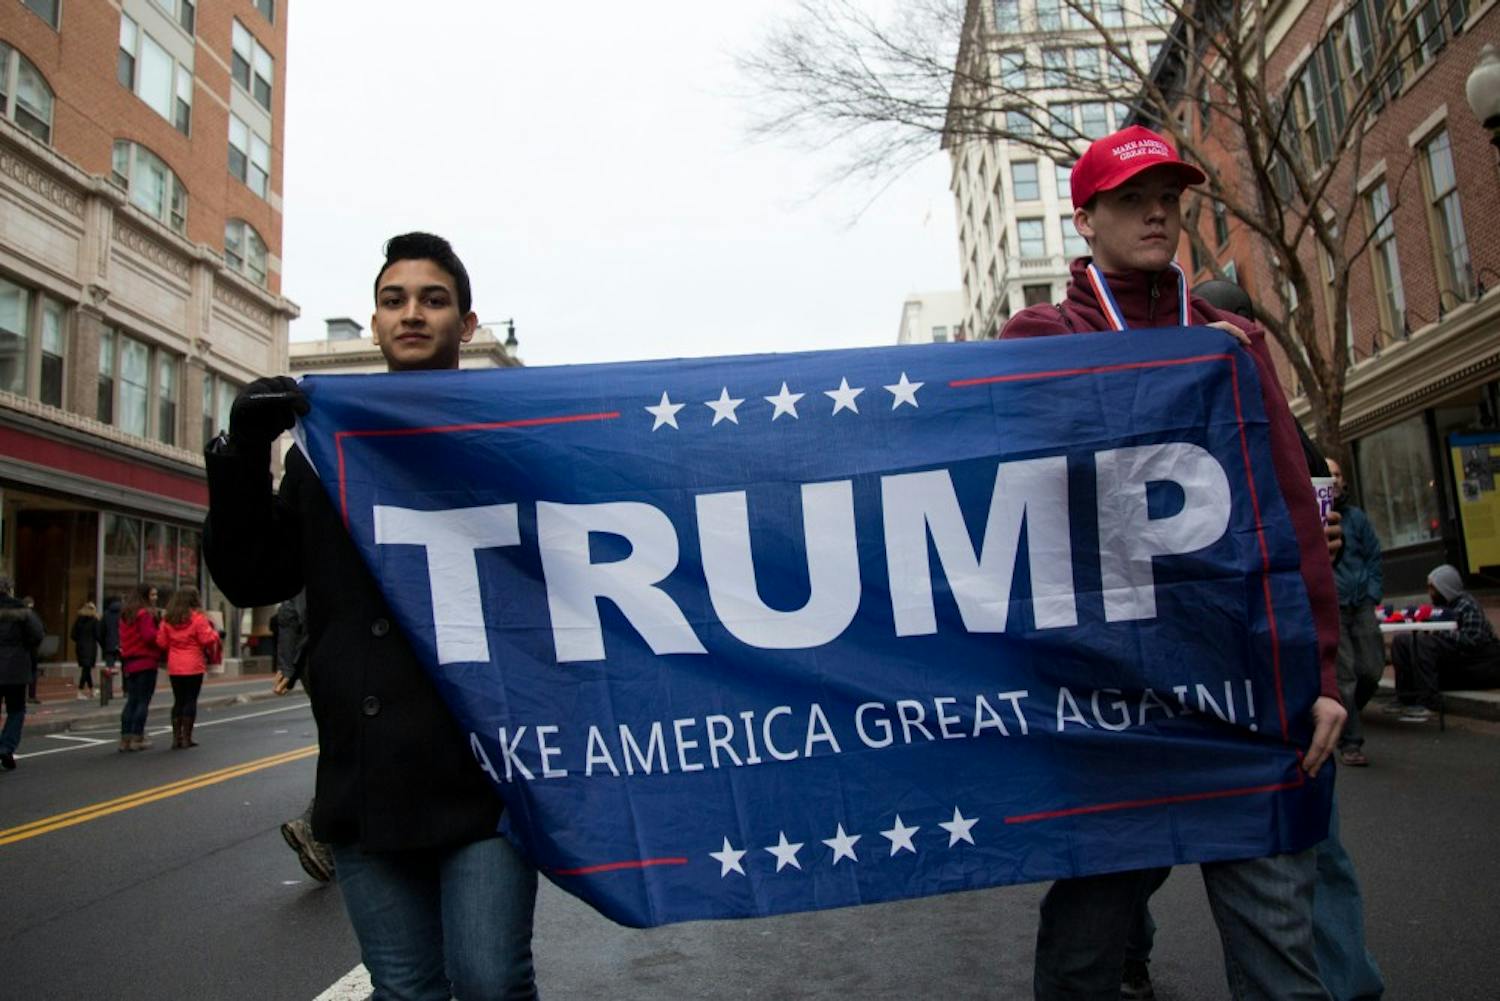 Two Trump supporters carry a banner embroidered with his name through the streets of Washinton on Inauguration Day.